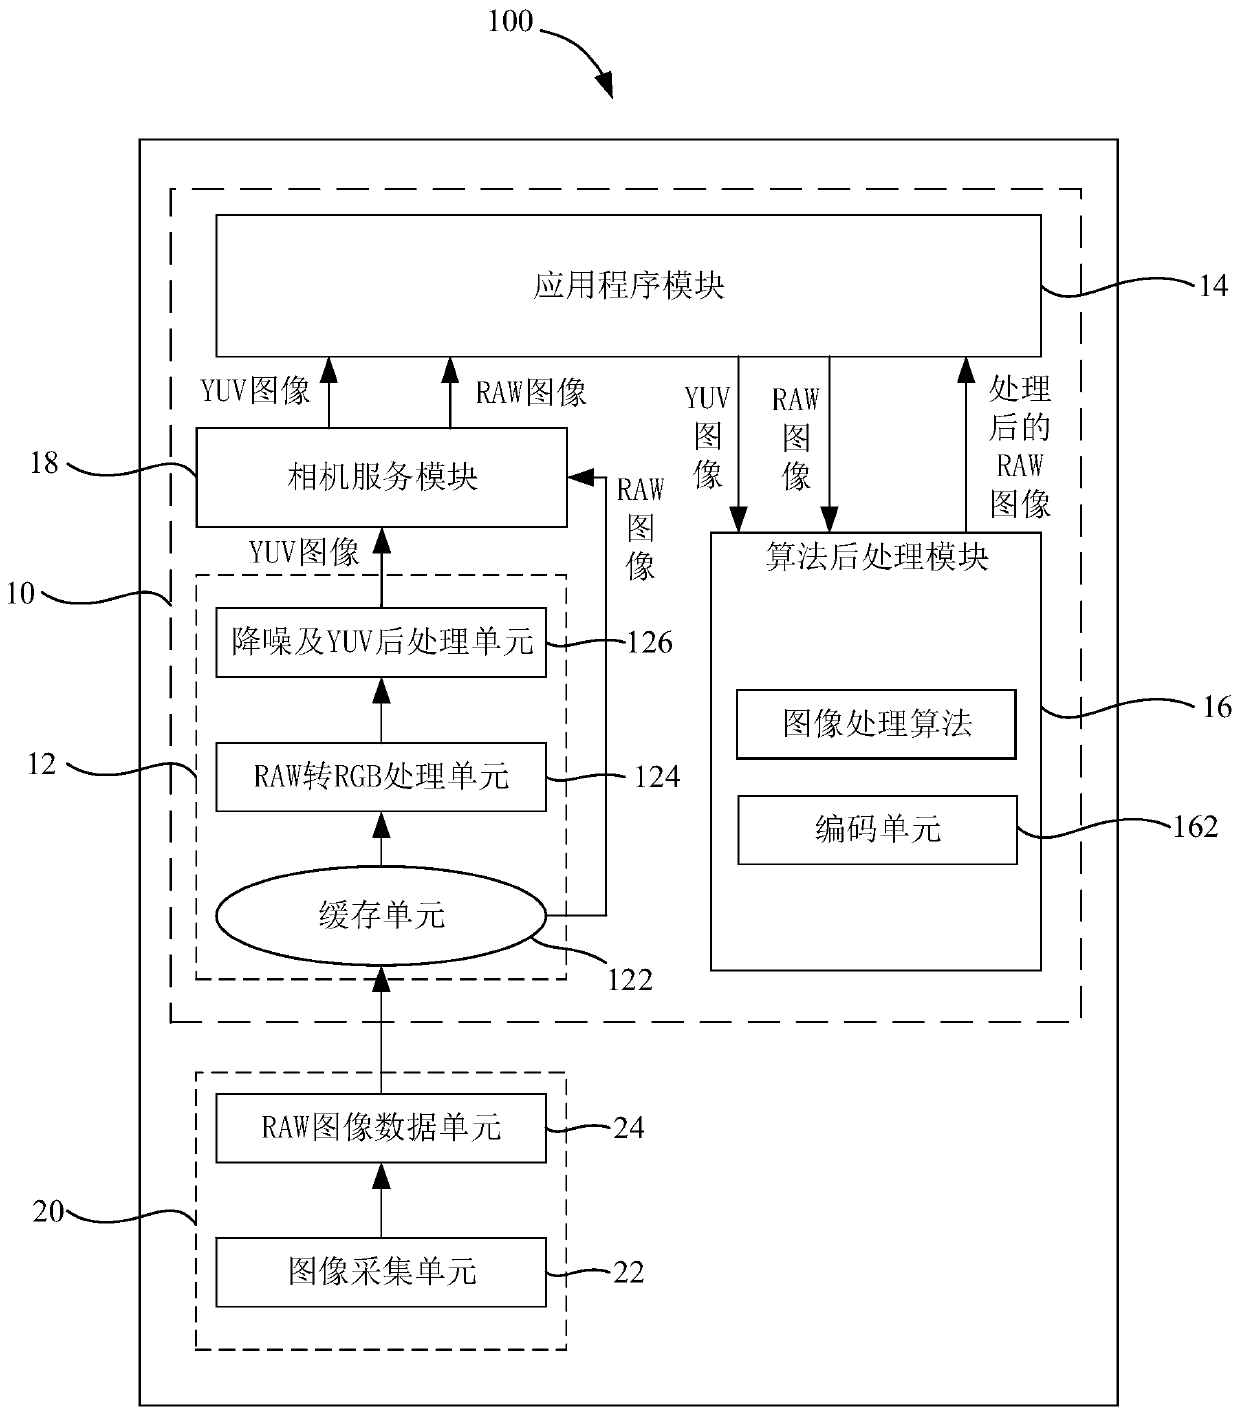 Image processor, image processing method, shooting device and electronic equipment